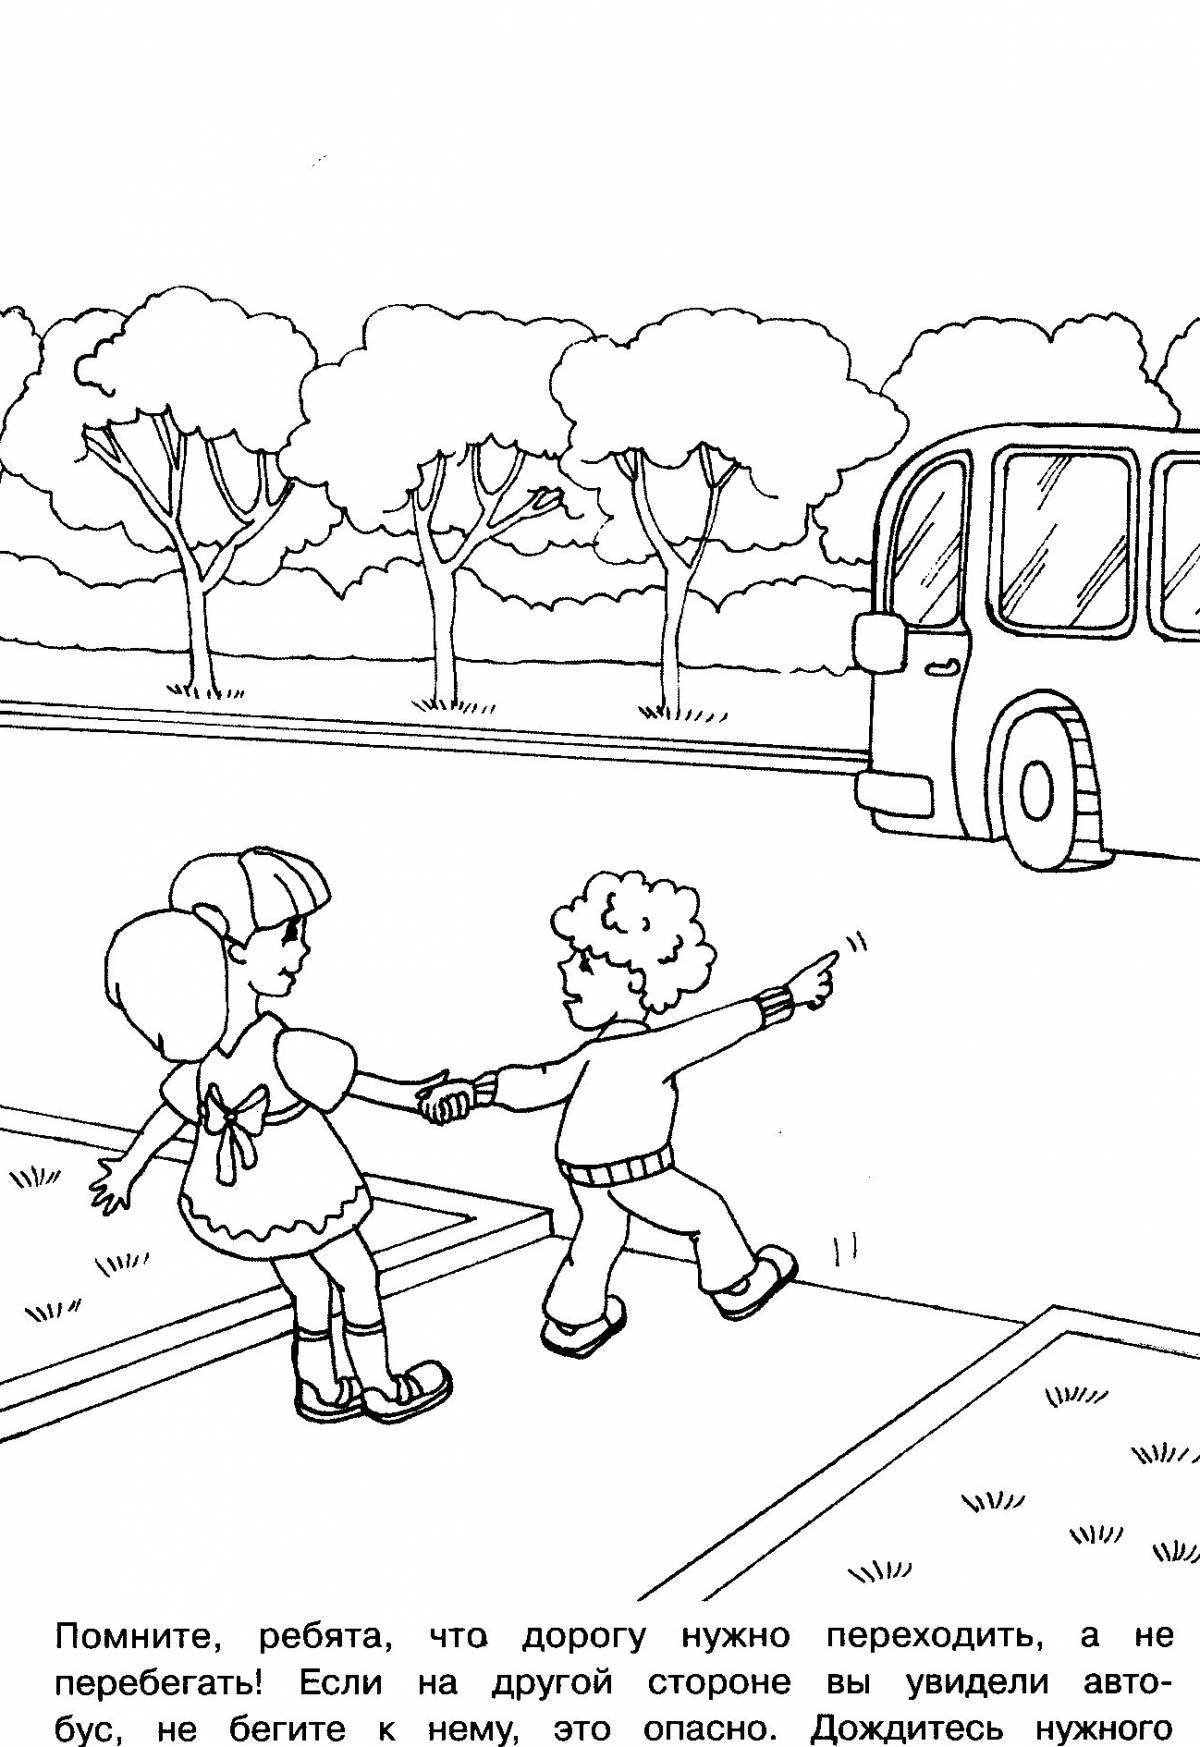 Exciting safety road coloring page